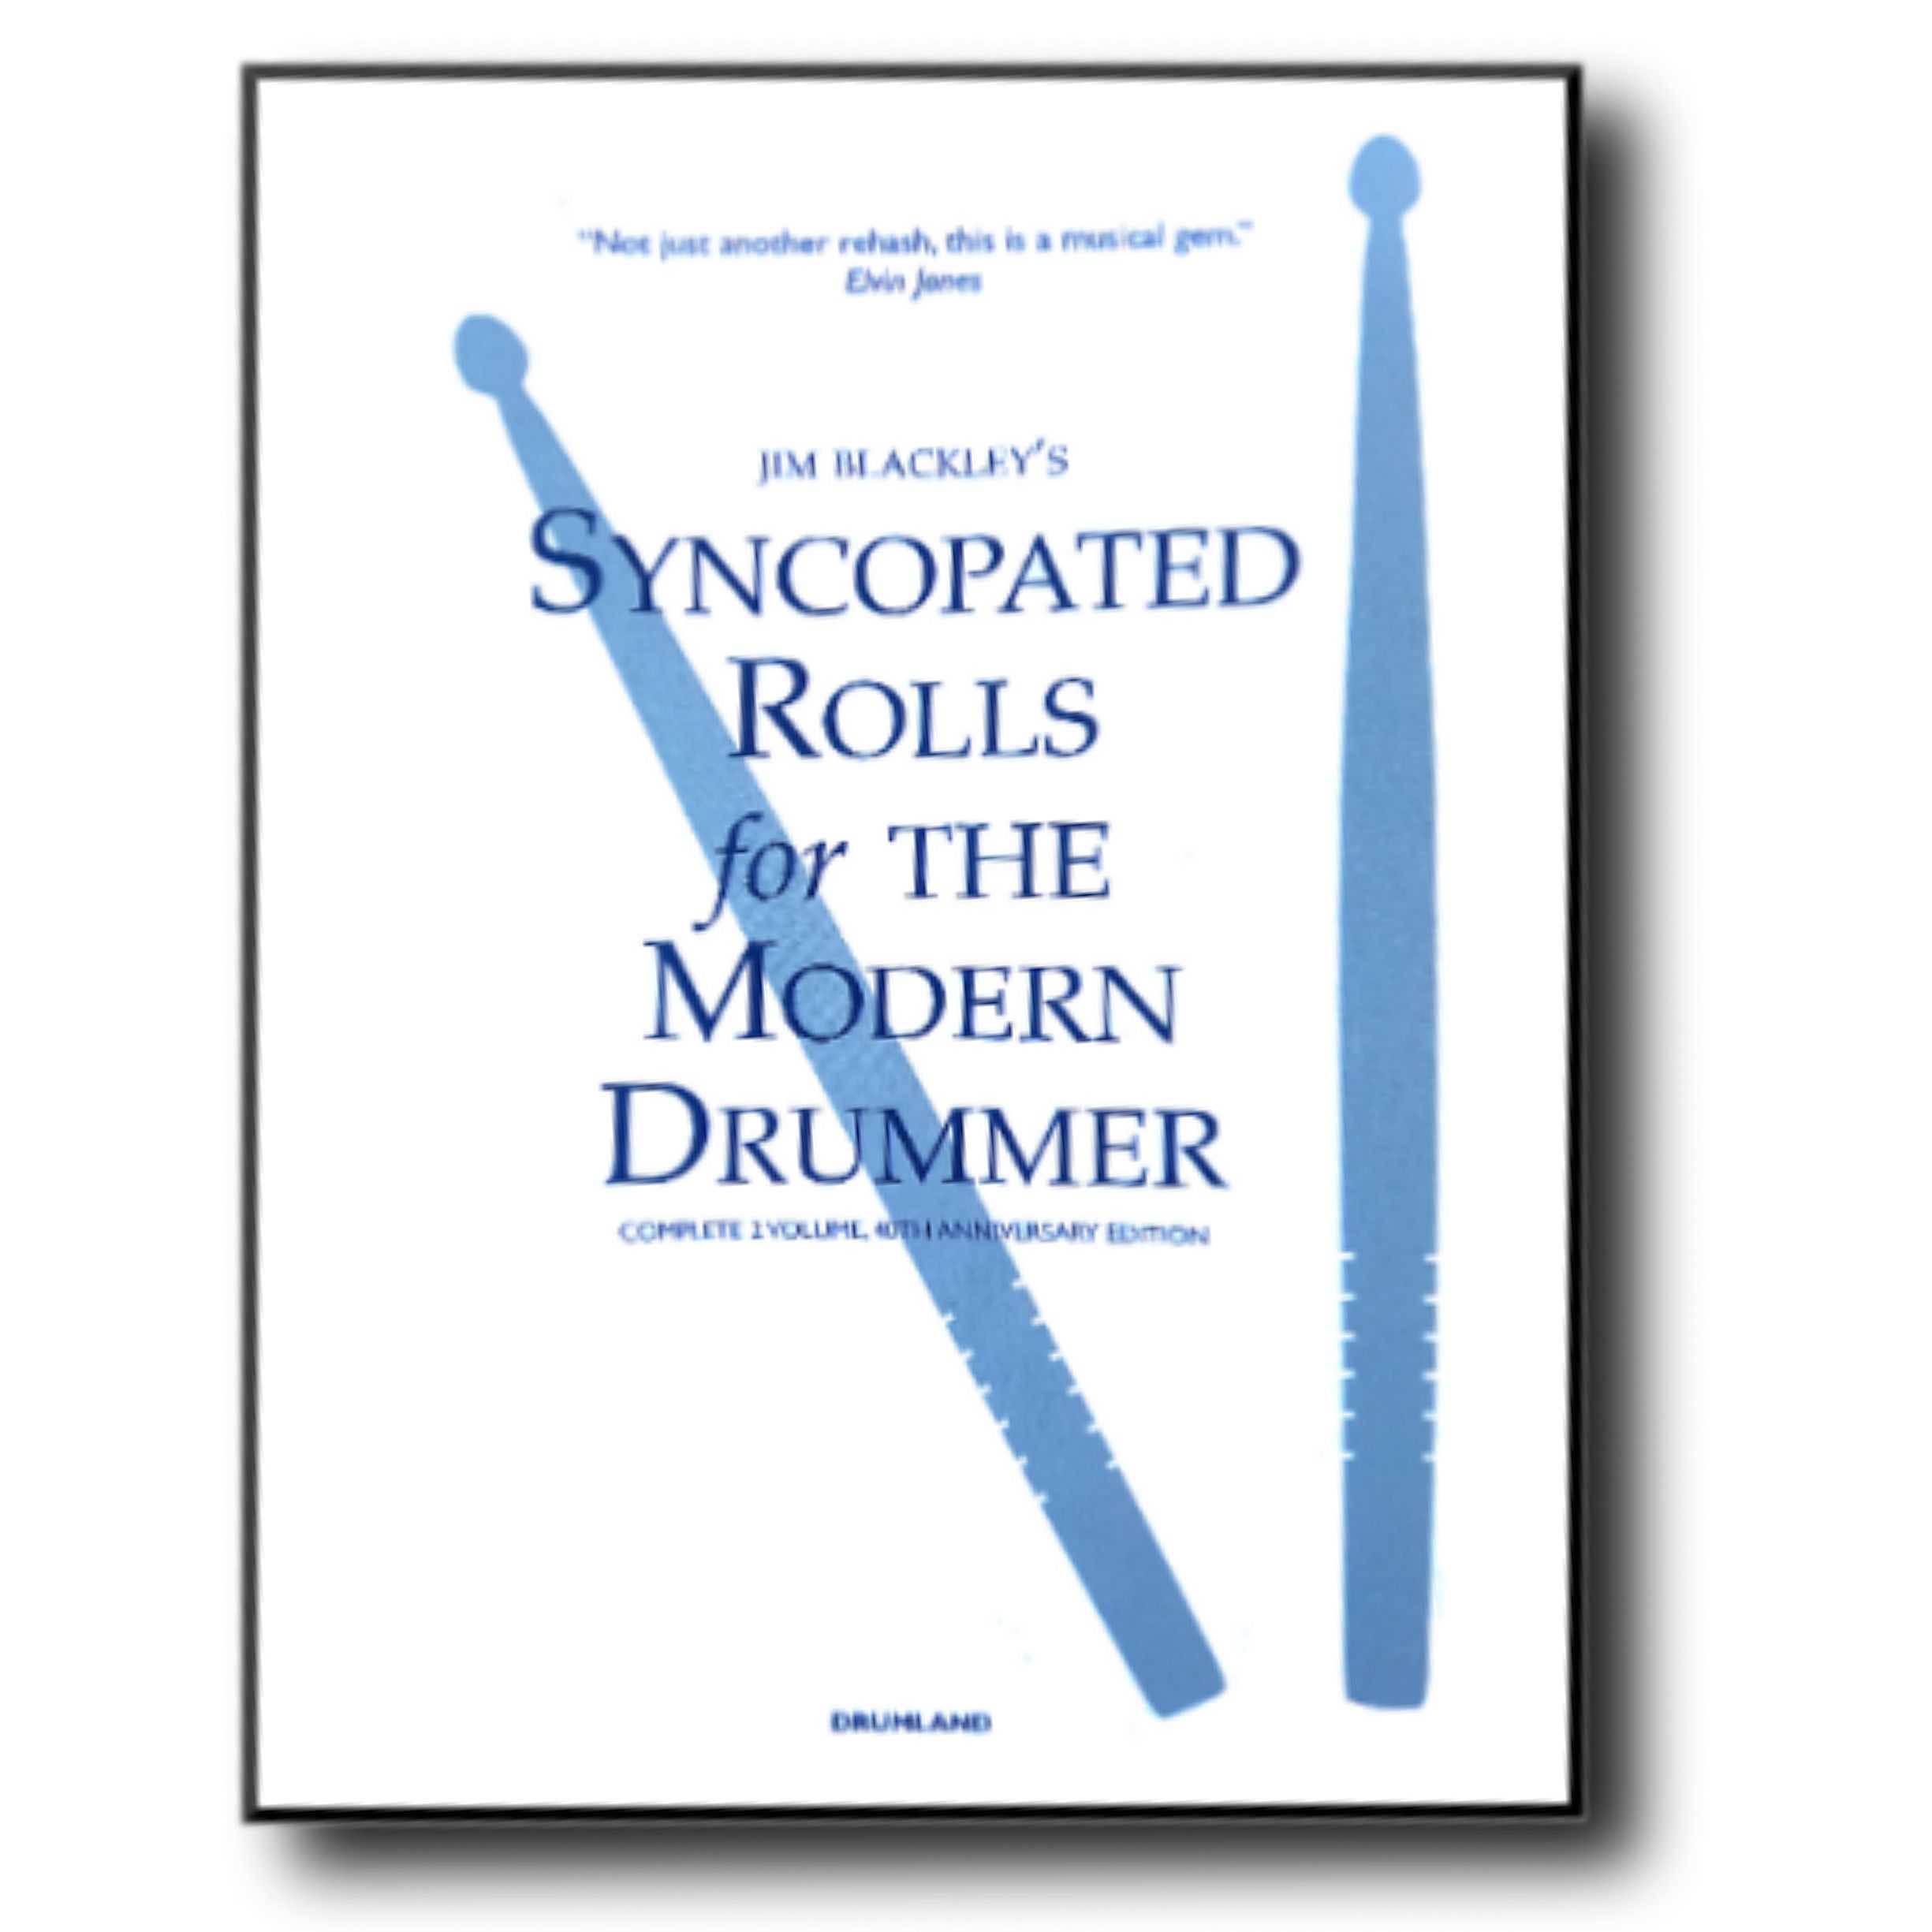 Syncopated Rolls for the Modern Drummer by Jim Blackley